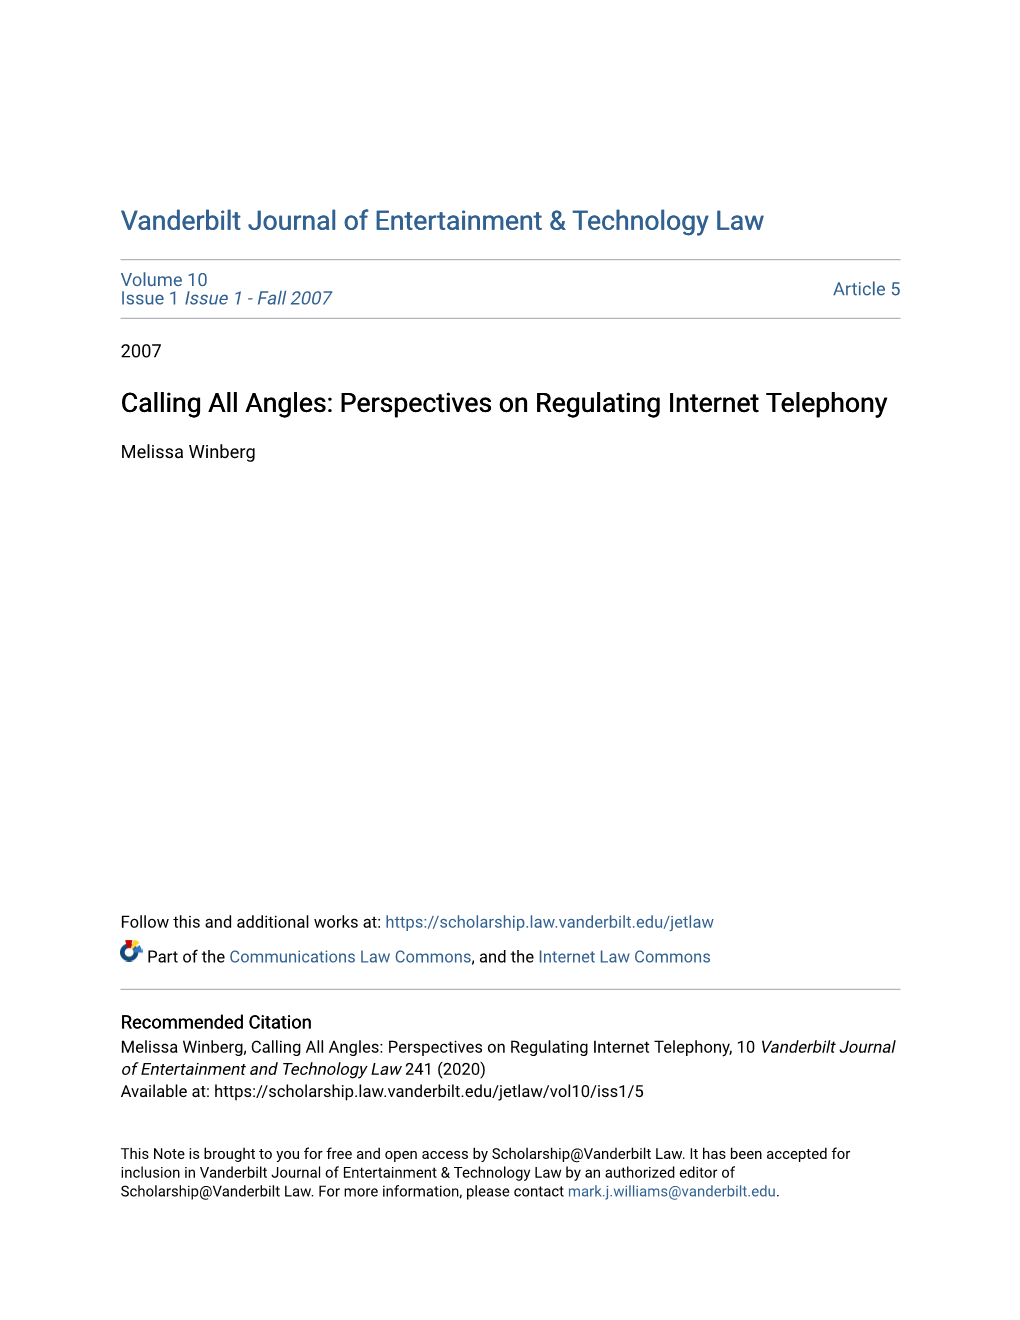 Perspectives on Regulating Internet Telephony